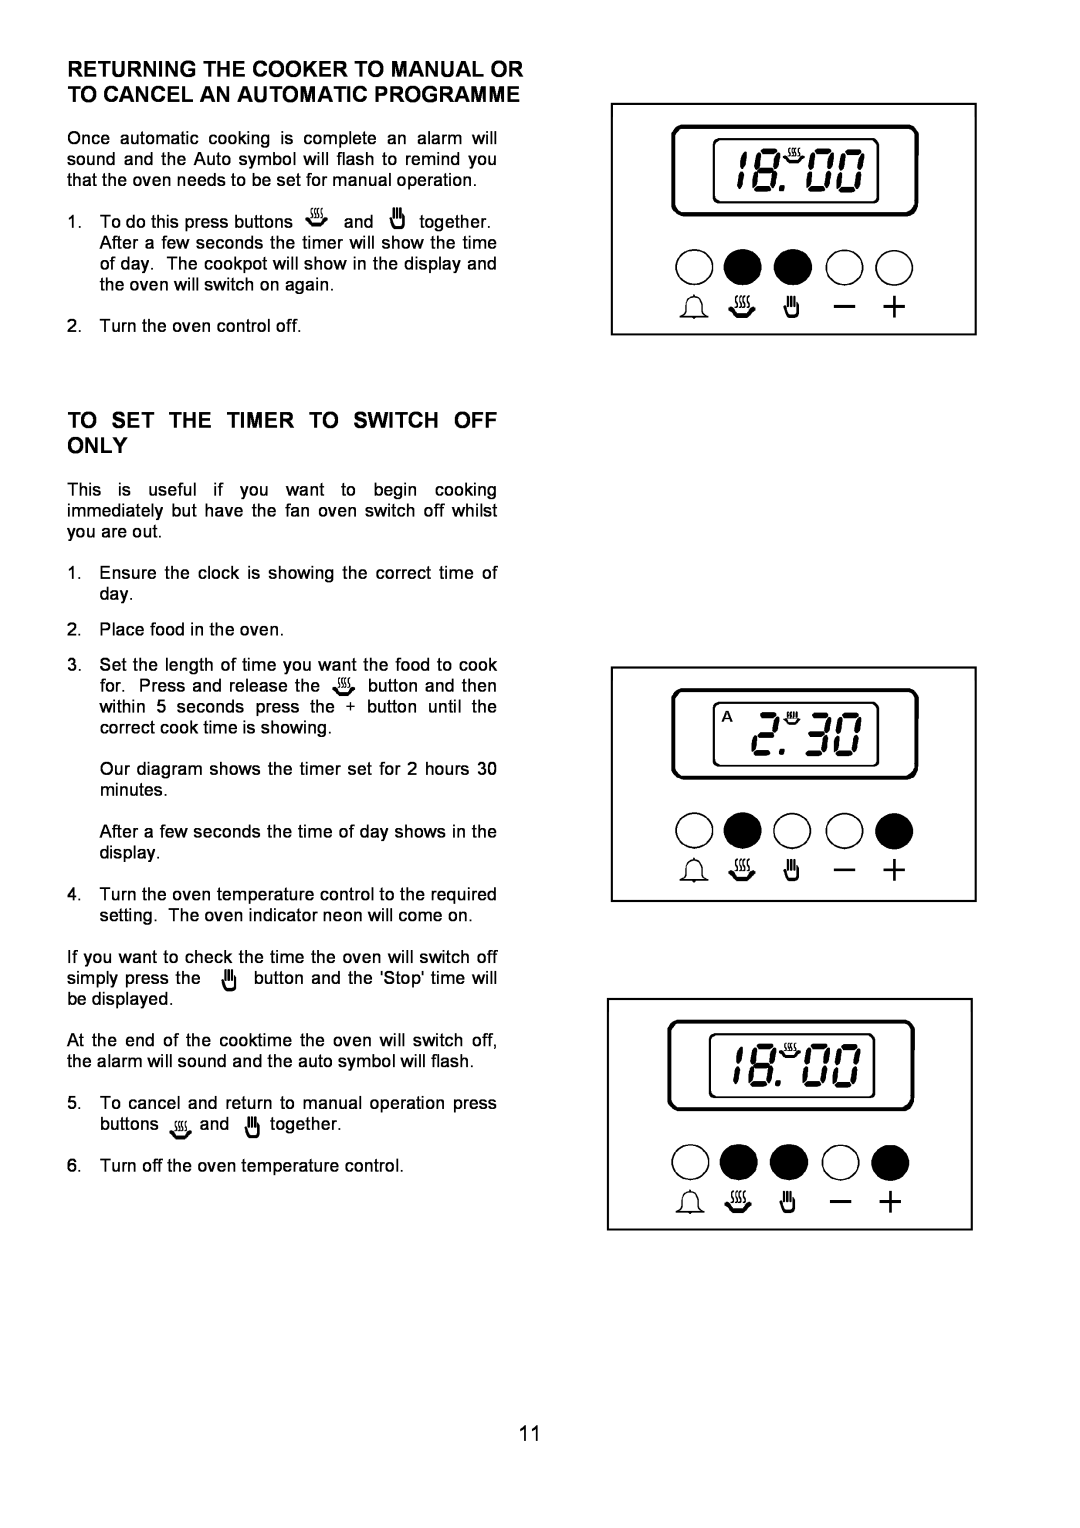 Zanussi ZHF865 Returning The Cooker To Manual Or To Cancel An Automatic Programme, To Set The Timer To Switch Off Only 